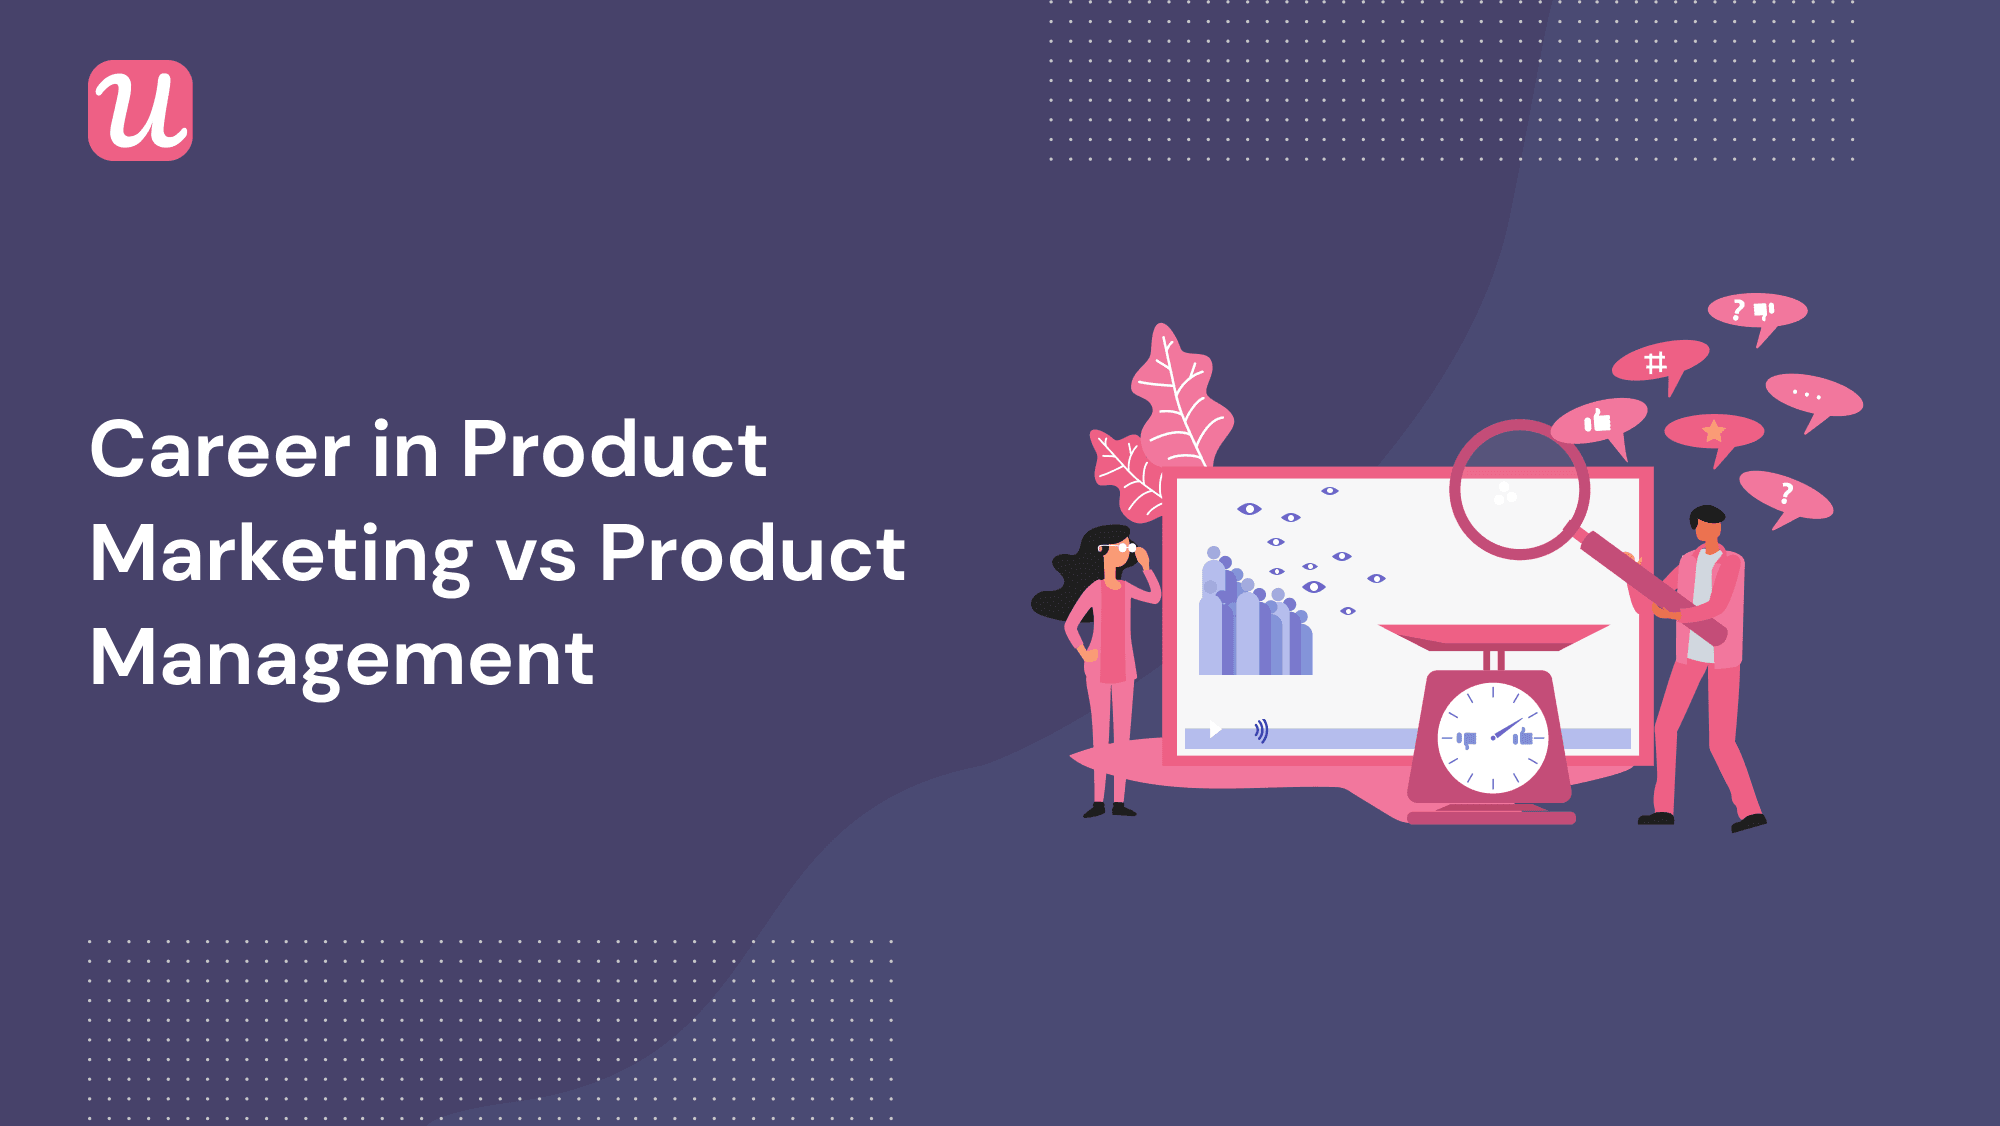 A Career in Product Marketing vs Product Management - What You Need to Know